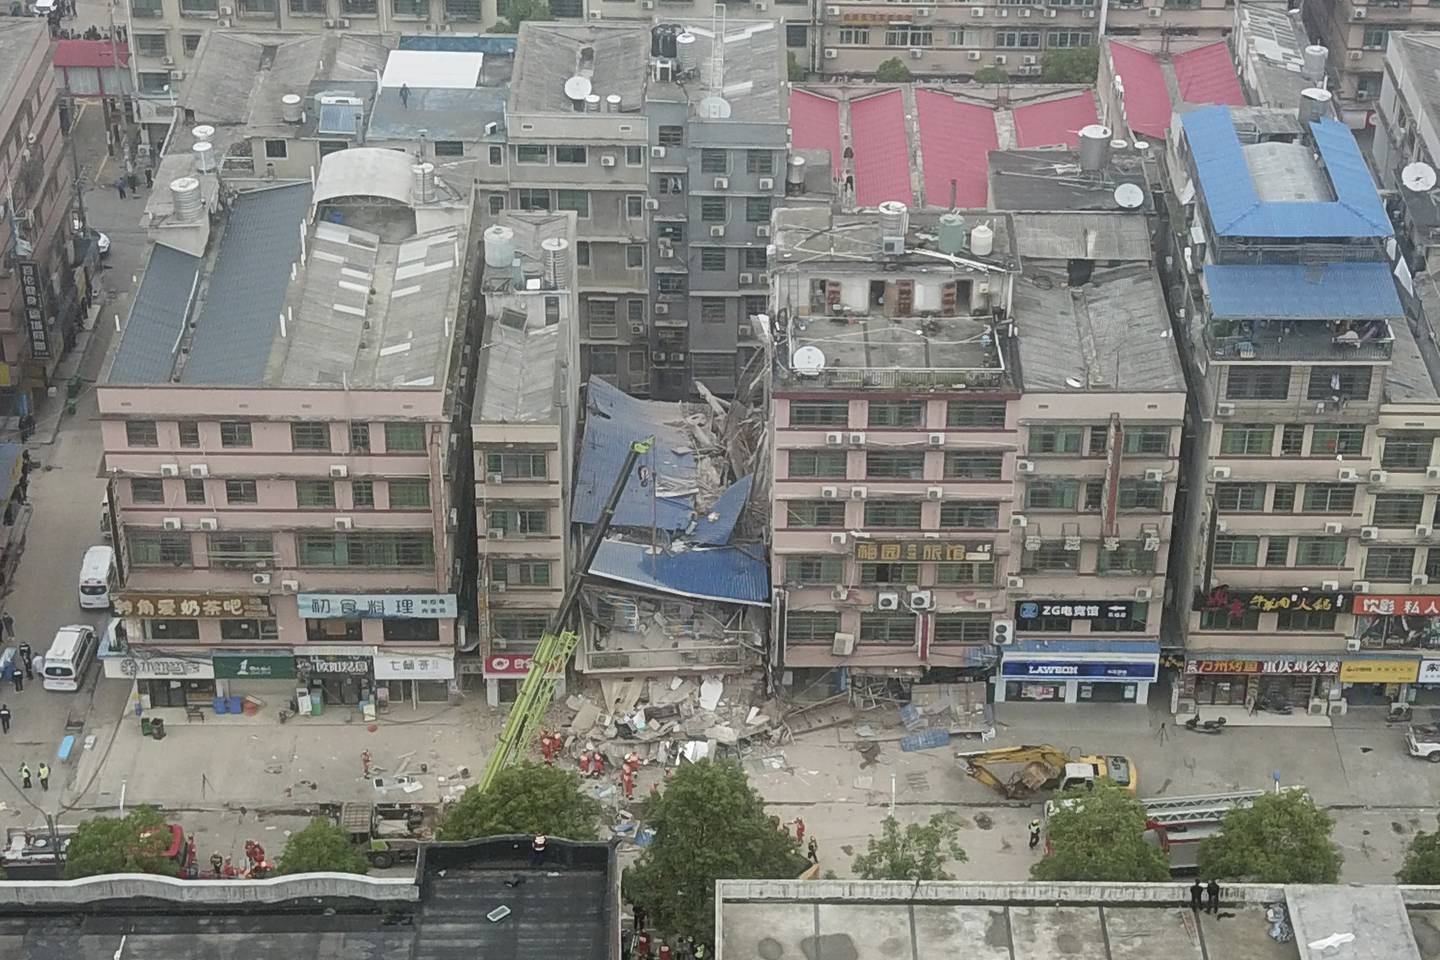 The site of the collapsed self-constructed residential building in Changsha. Xinhua/AP